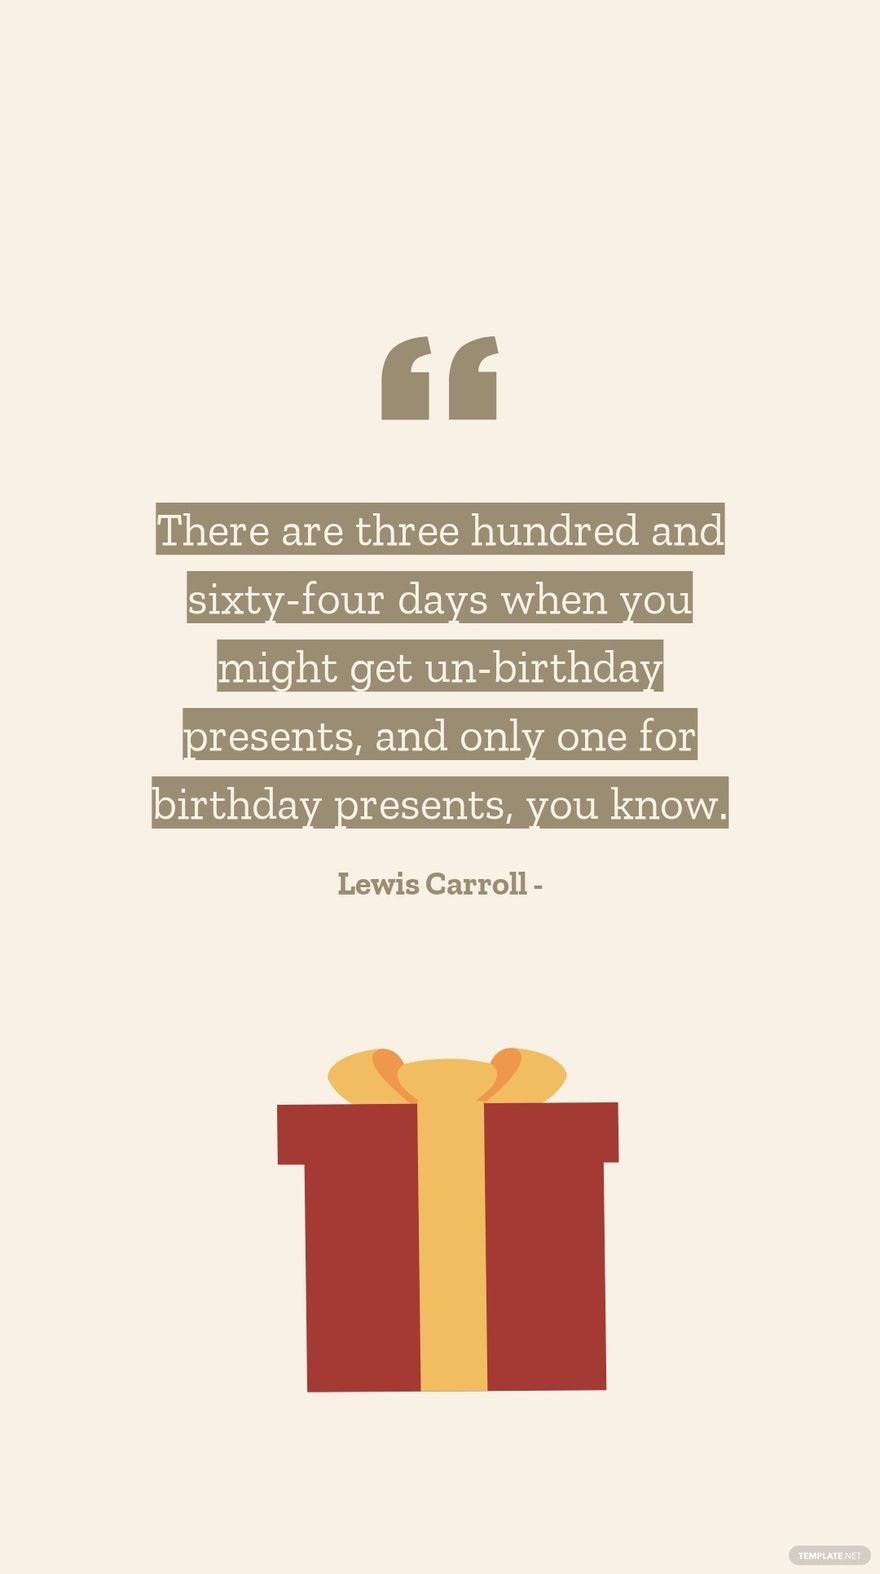 Free Lewis Carroll - There are three hundred and sixty-four days when you might get un-birthday presents, and only one for birthday presents, you know. in JPG